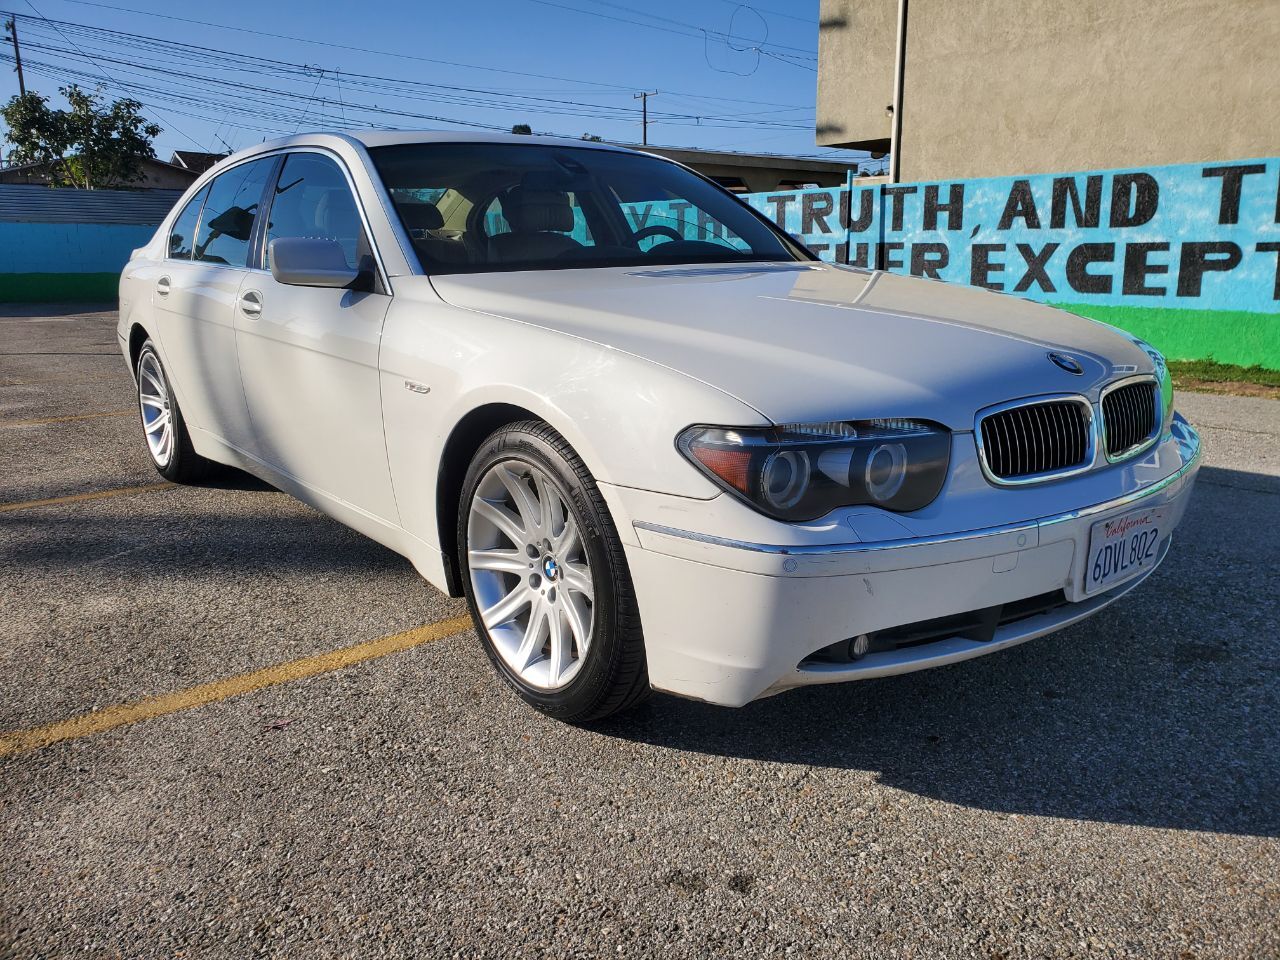 2005 BMW 7 Series For Sale - Carsforsale.com®